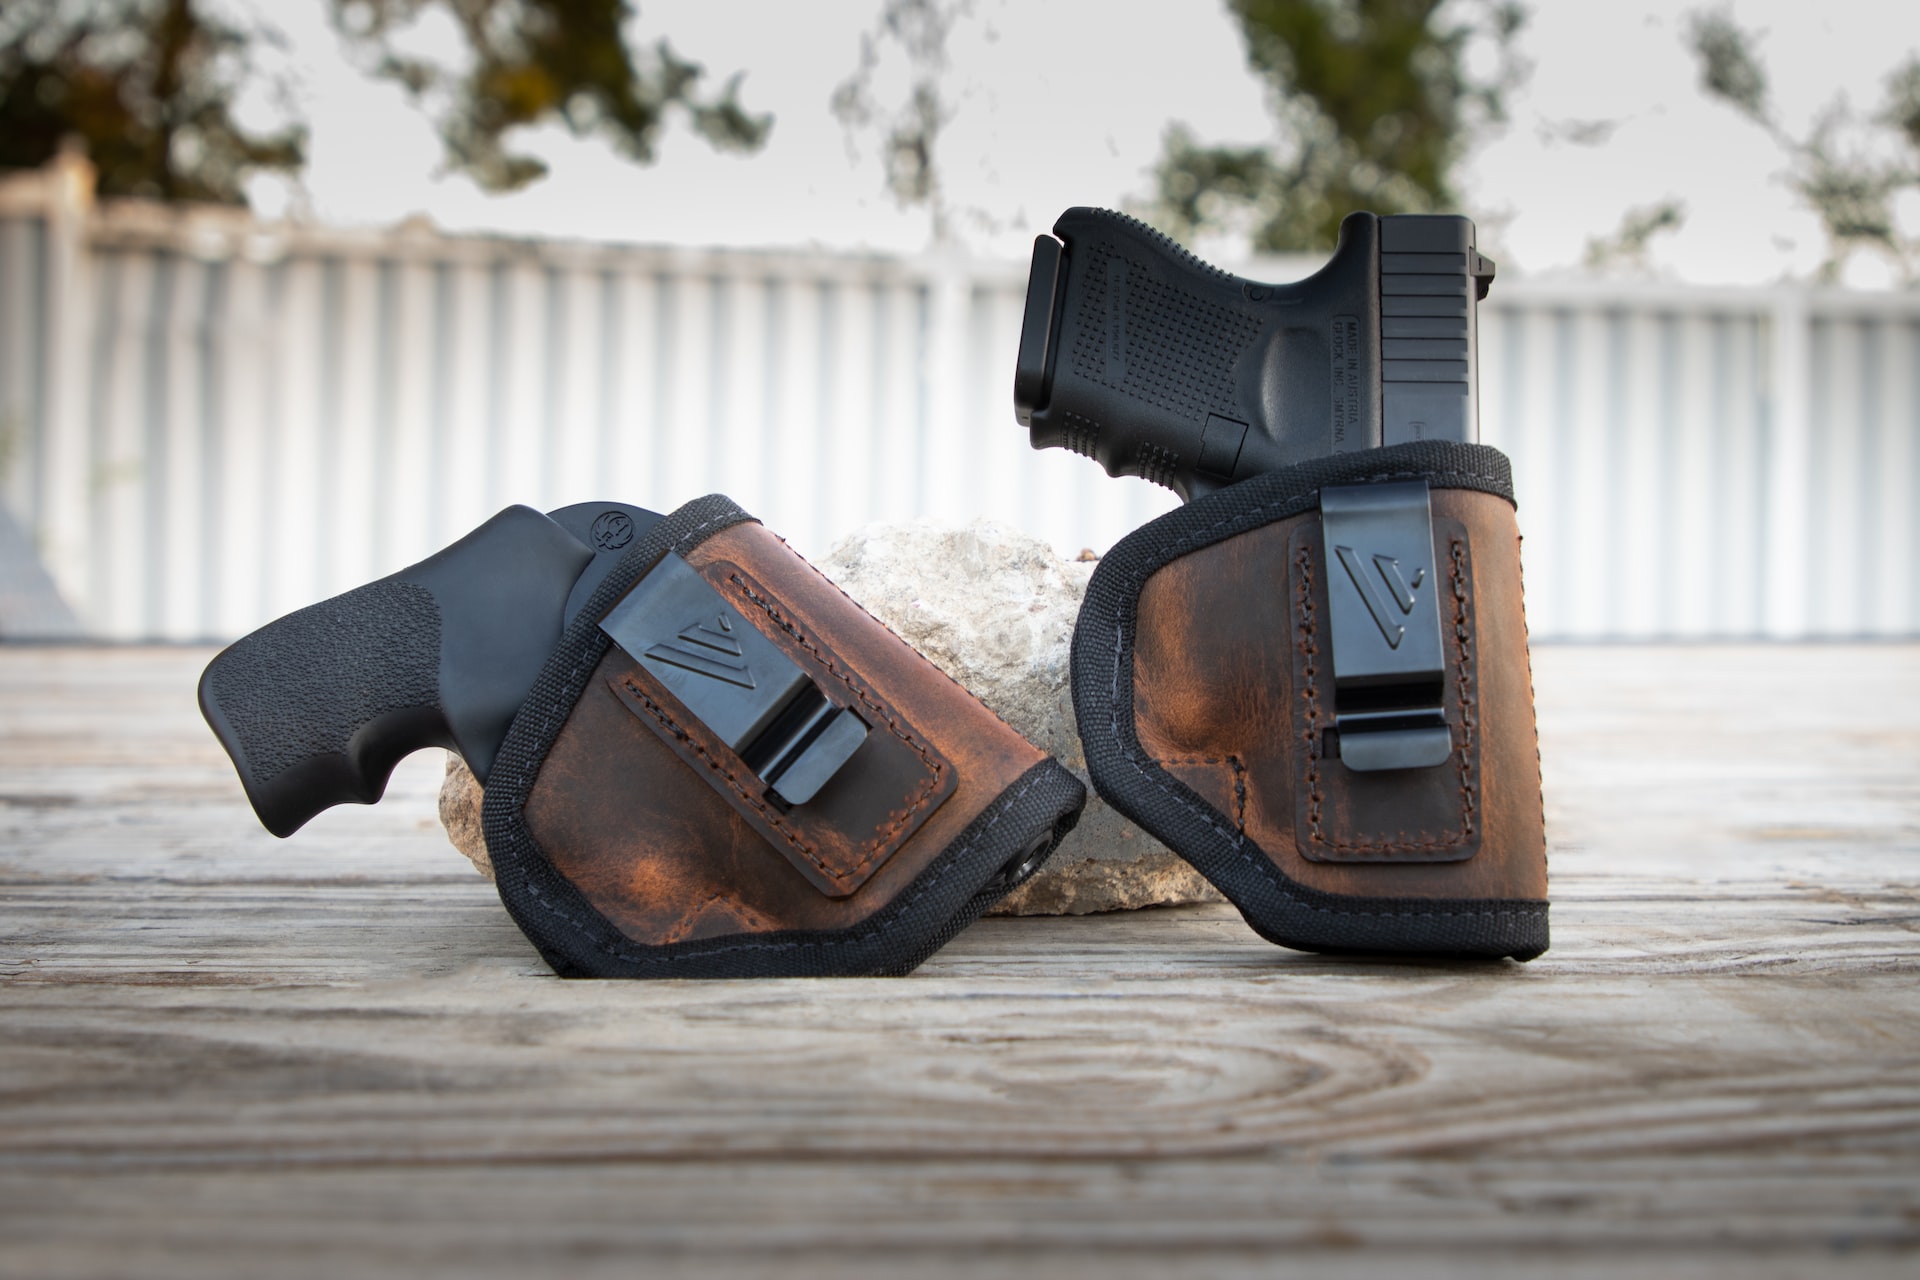 Arizona open carry laws - holstered guns